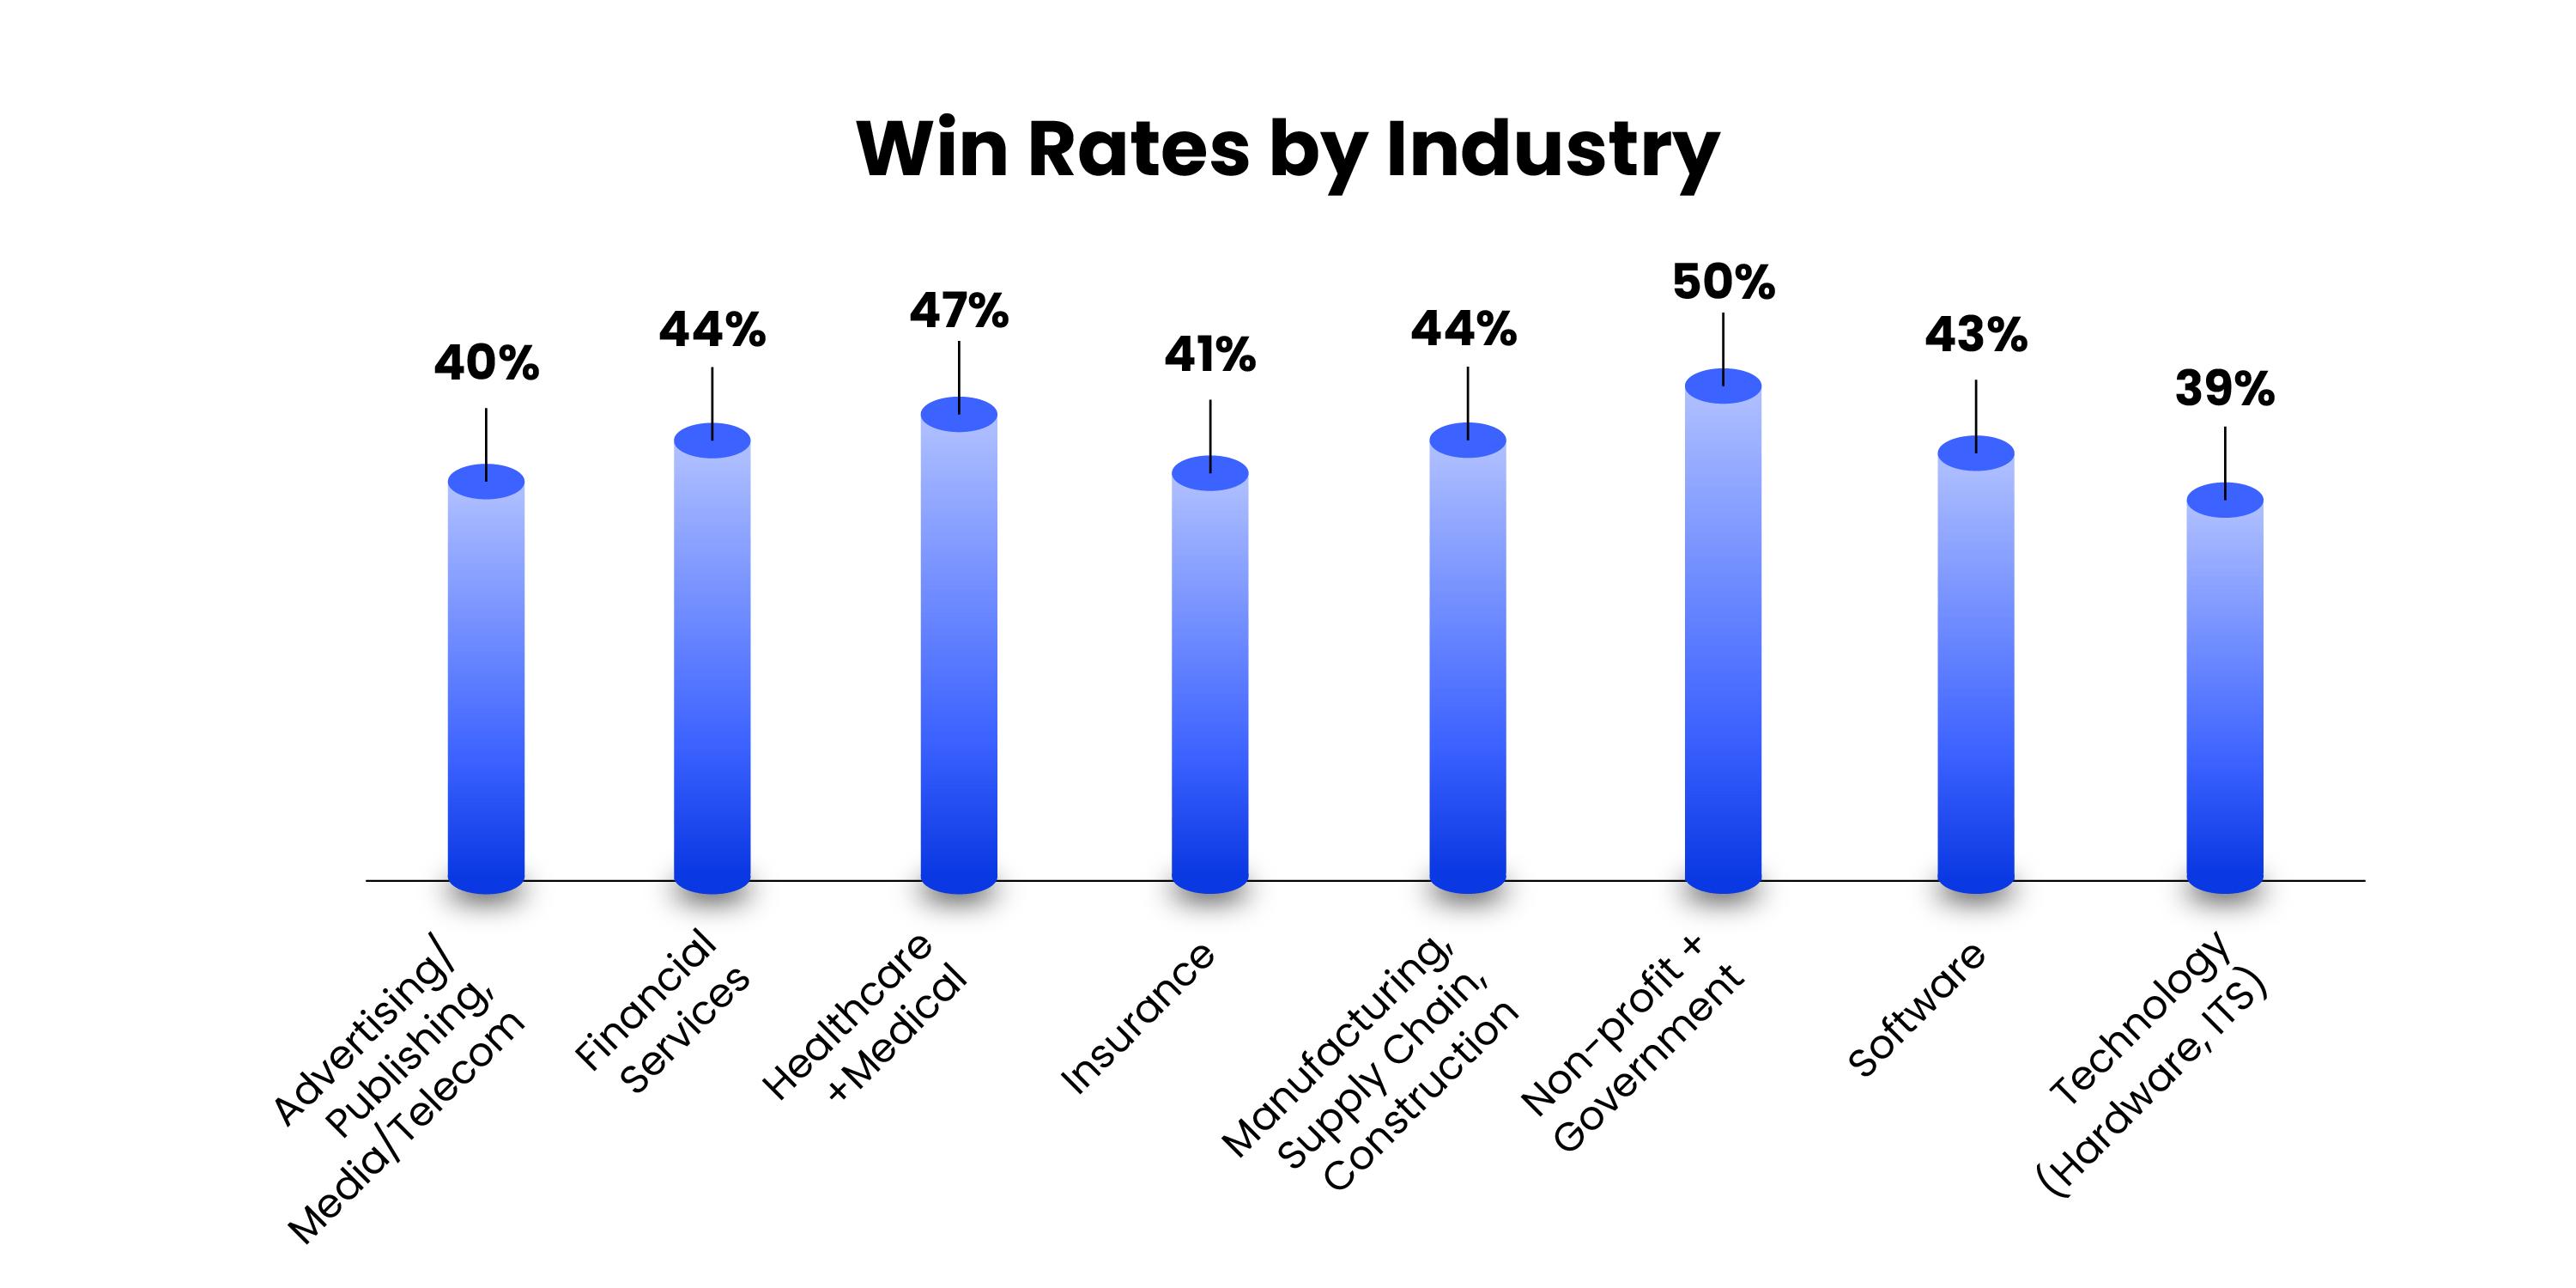 Win rate by industry. Advertising at 40%. Financial services at 44%. Healthcare at 47%. Insurance at 41%. Non-profit at 50%. Software at 43%. Technology at 39%.